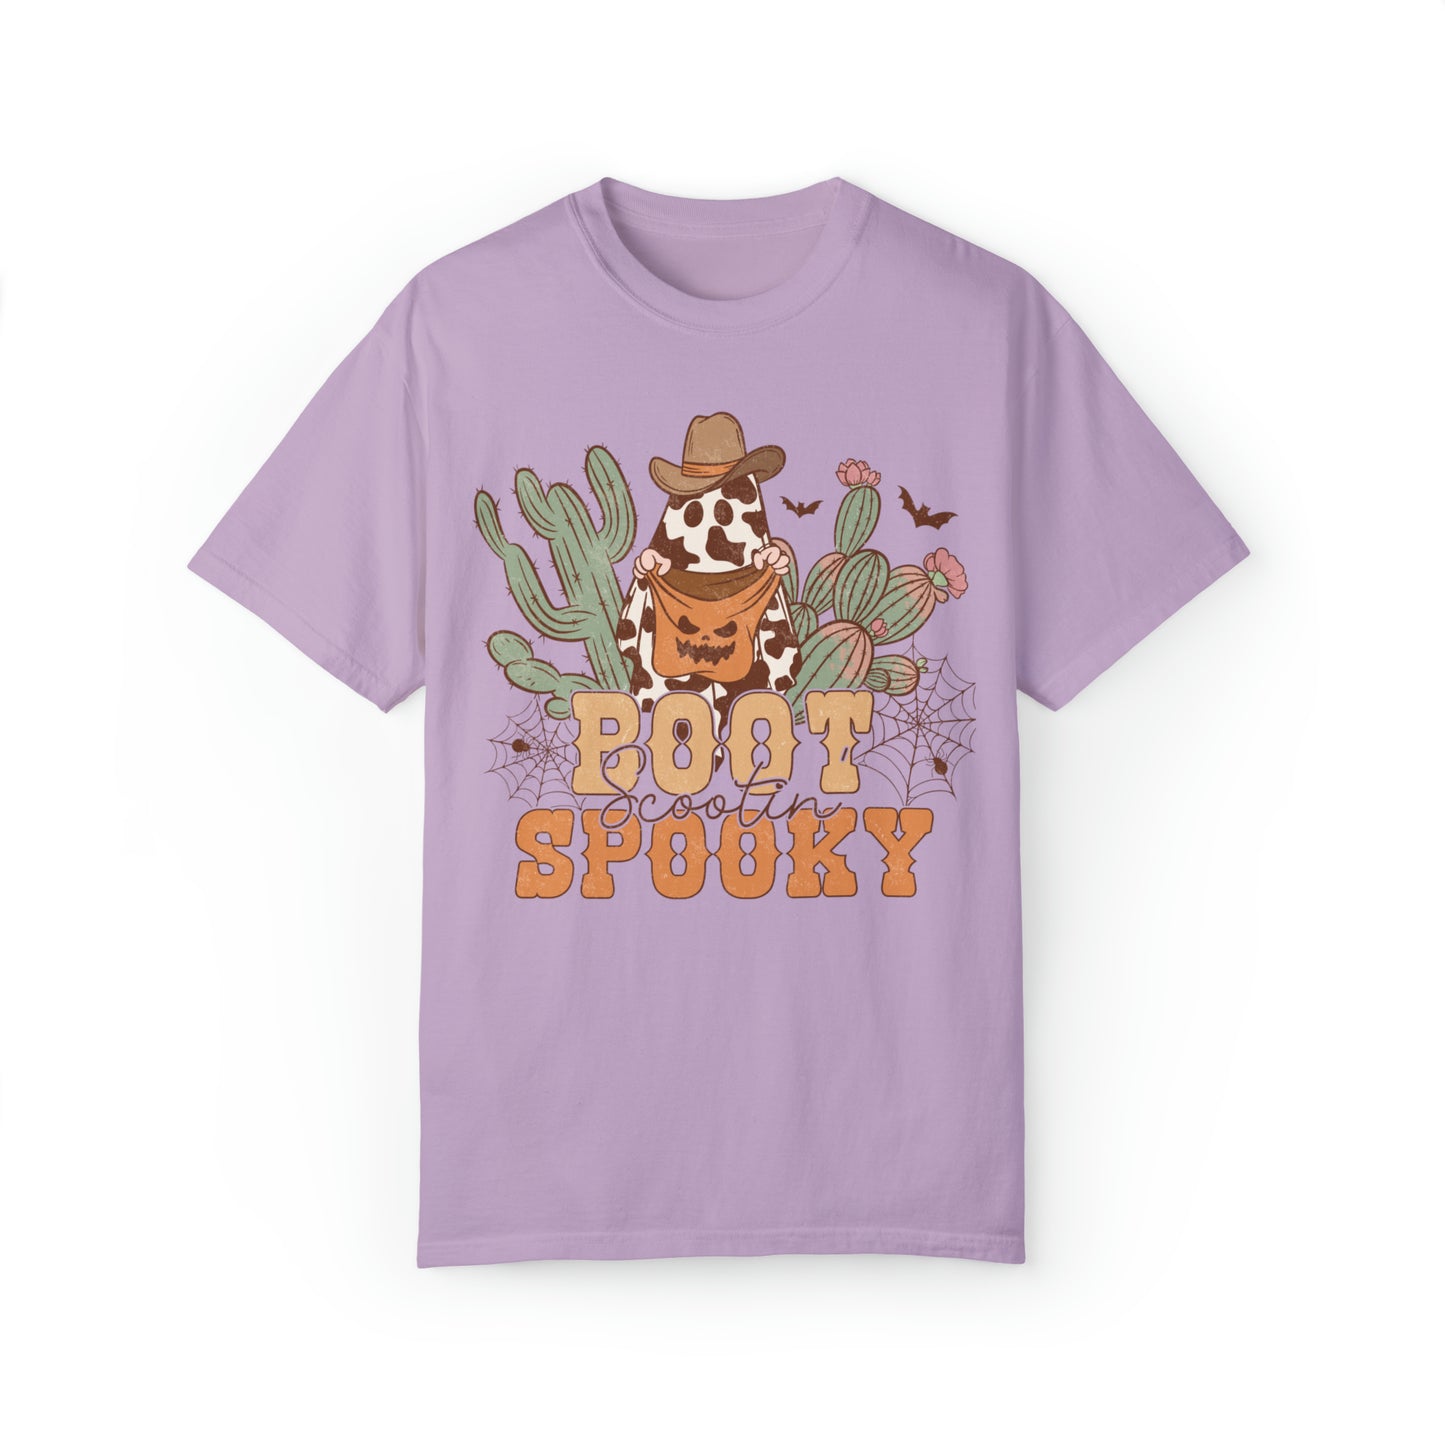 Comfort Colors Boot Scootin Spooky Country Western Halloween Shirt